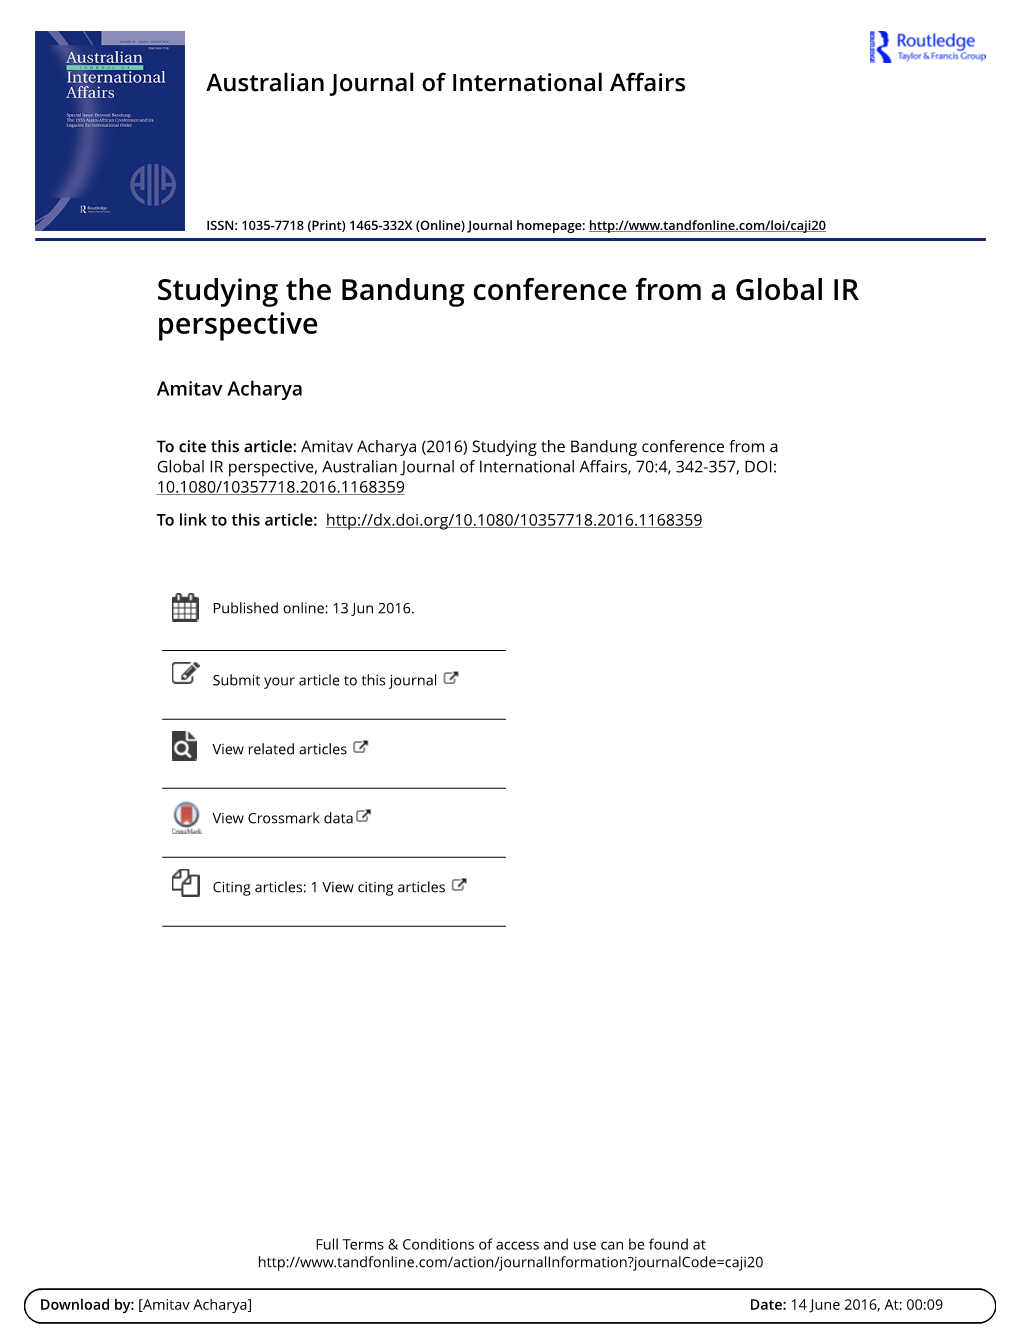 Studying the Bandung Conference from a Global IR Perspective